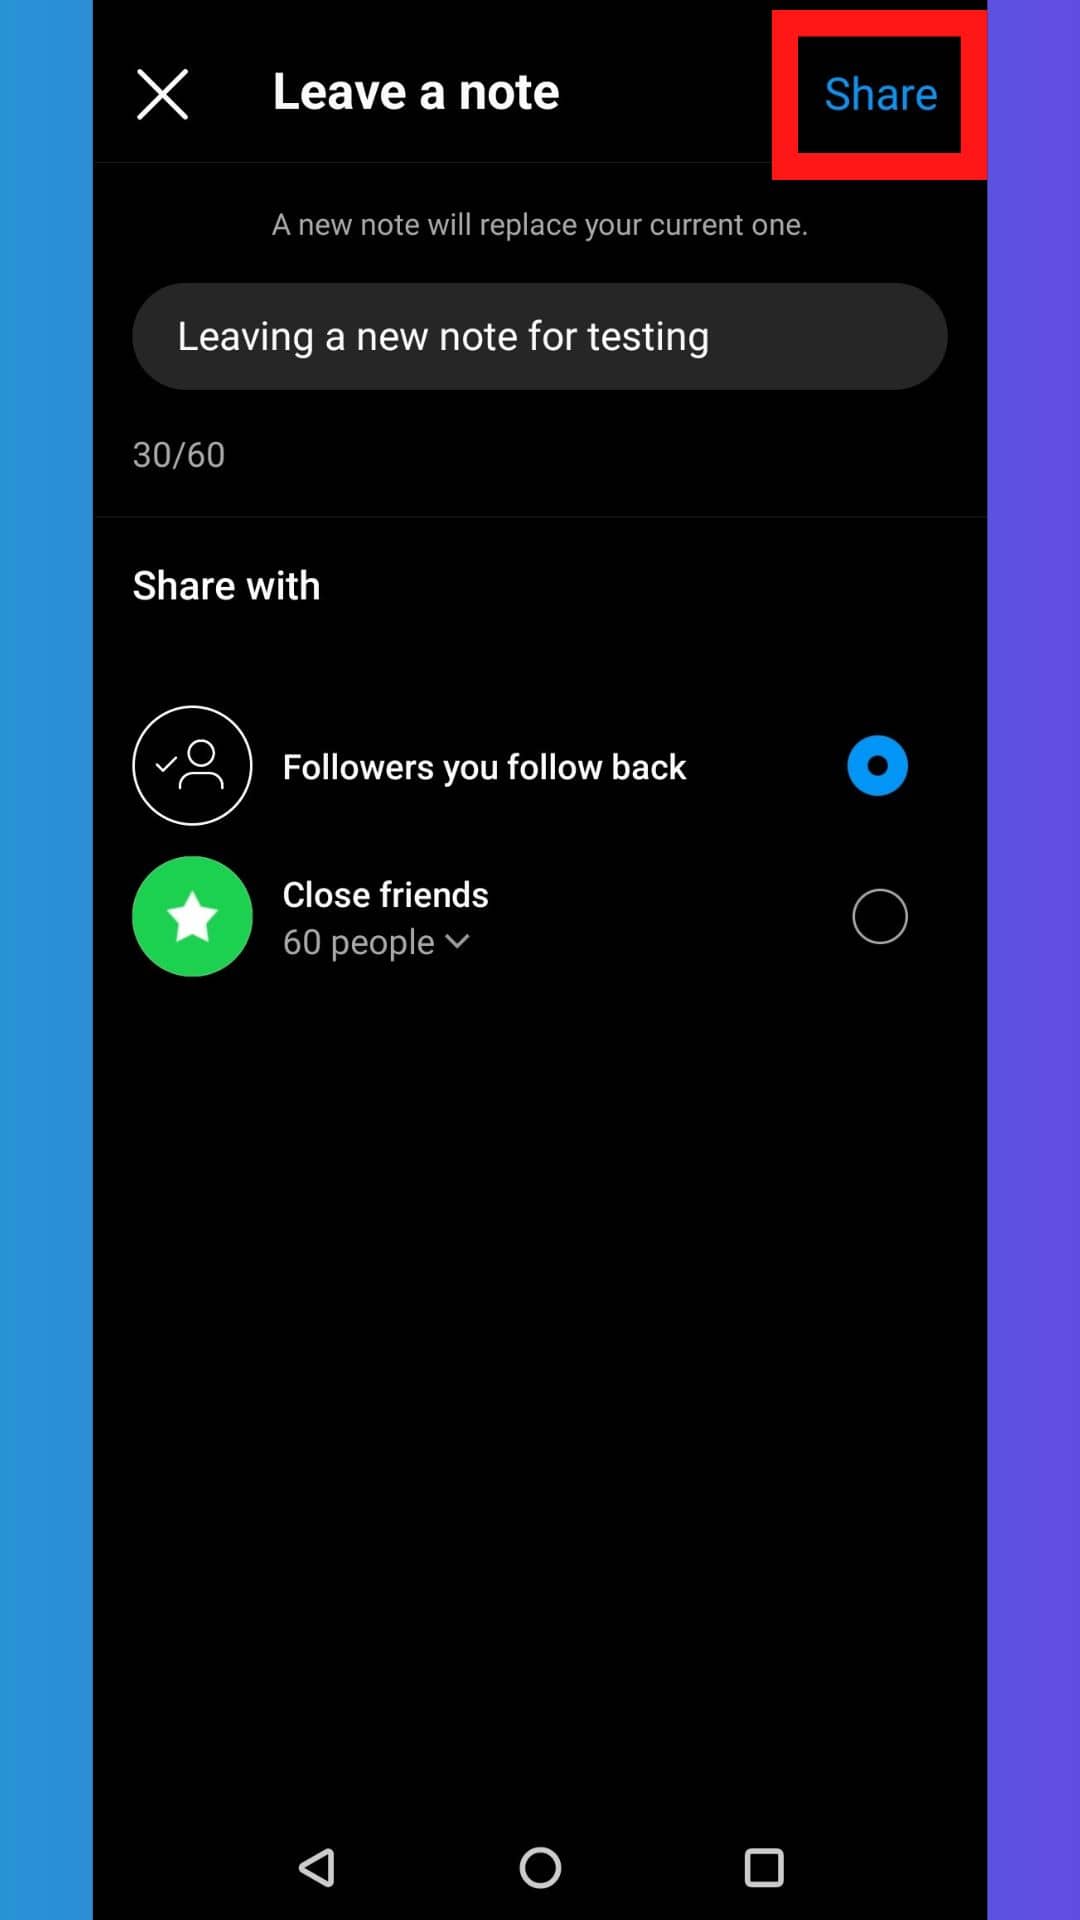 Tap Share in the top right to share your new note